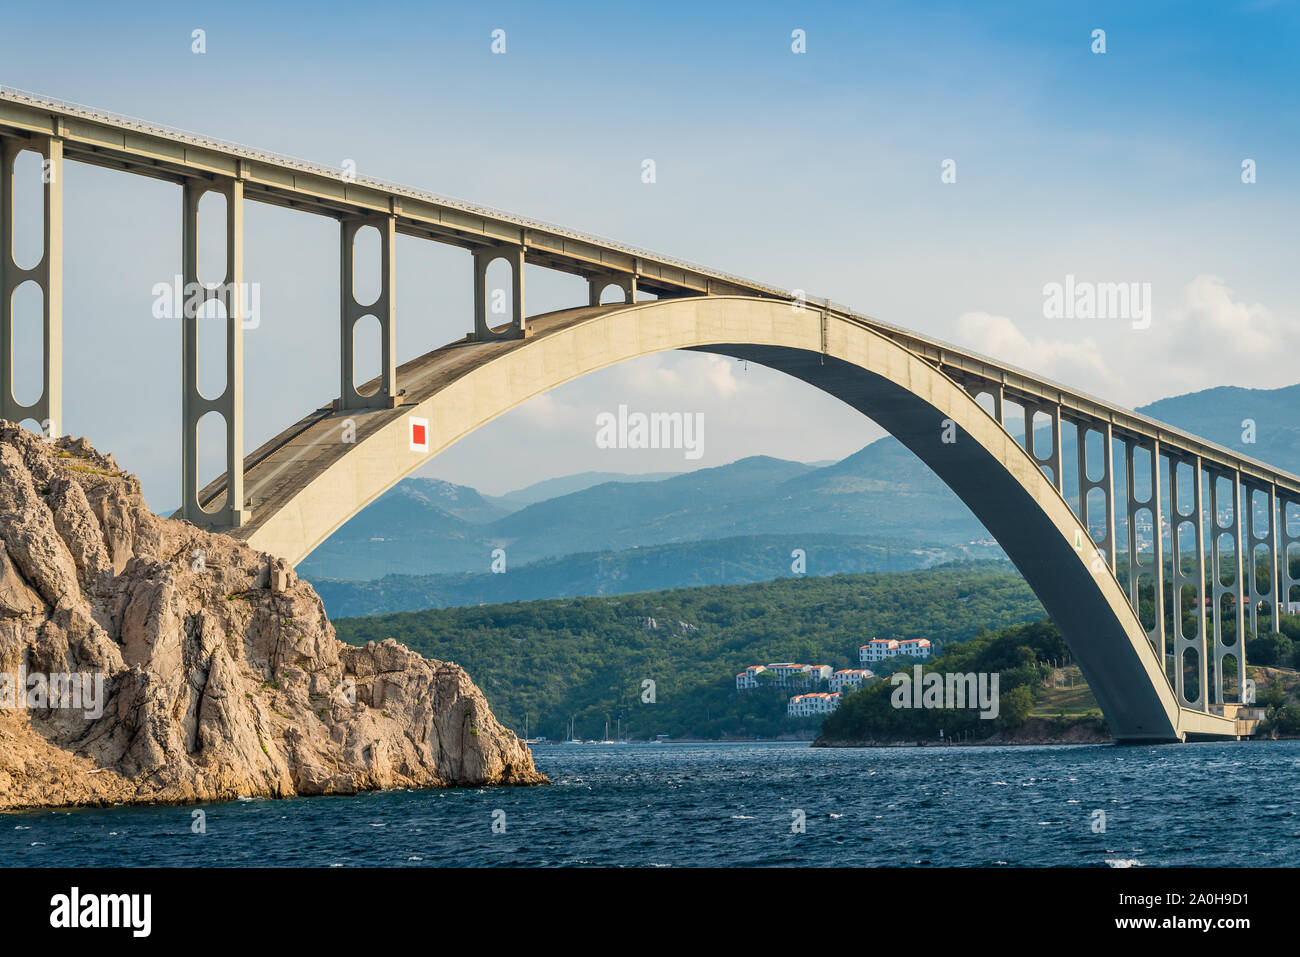 Bridge to the island Krk under blue sky on a sunny summer day. Krk is the big island of the Croatian coast of the Adriatic Sea. Travel landscape Stock Photo